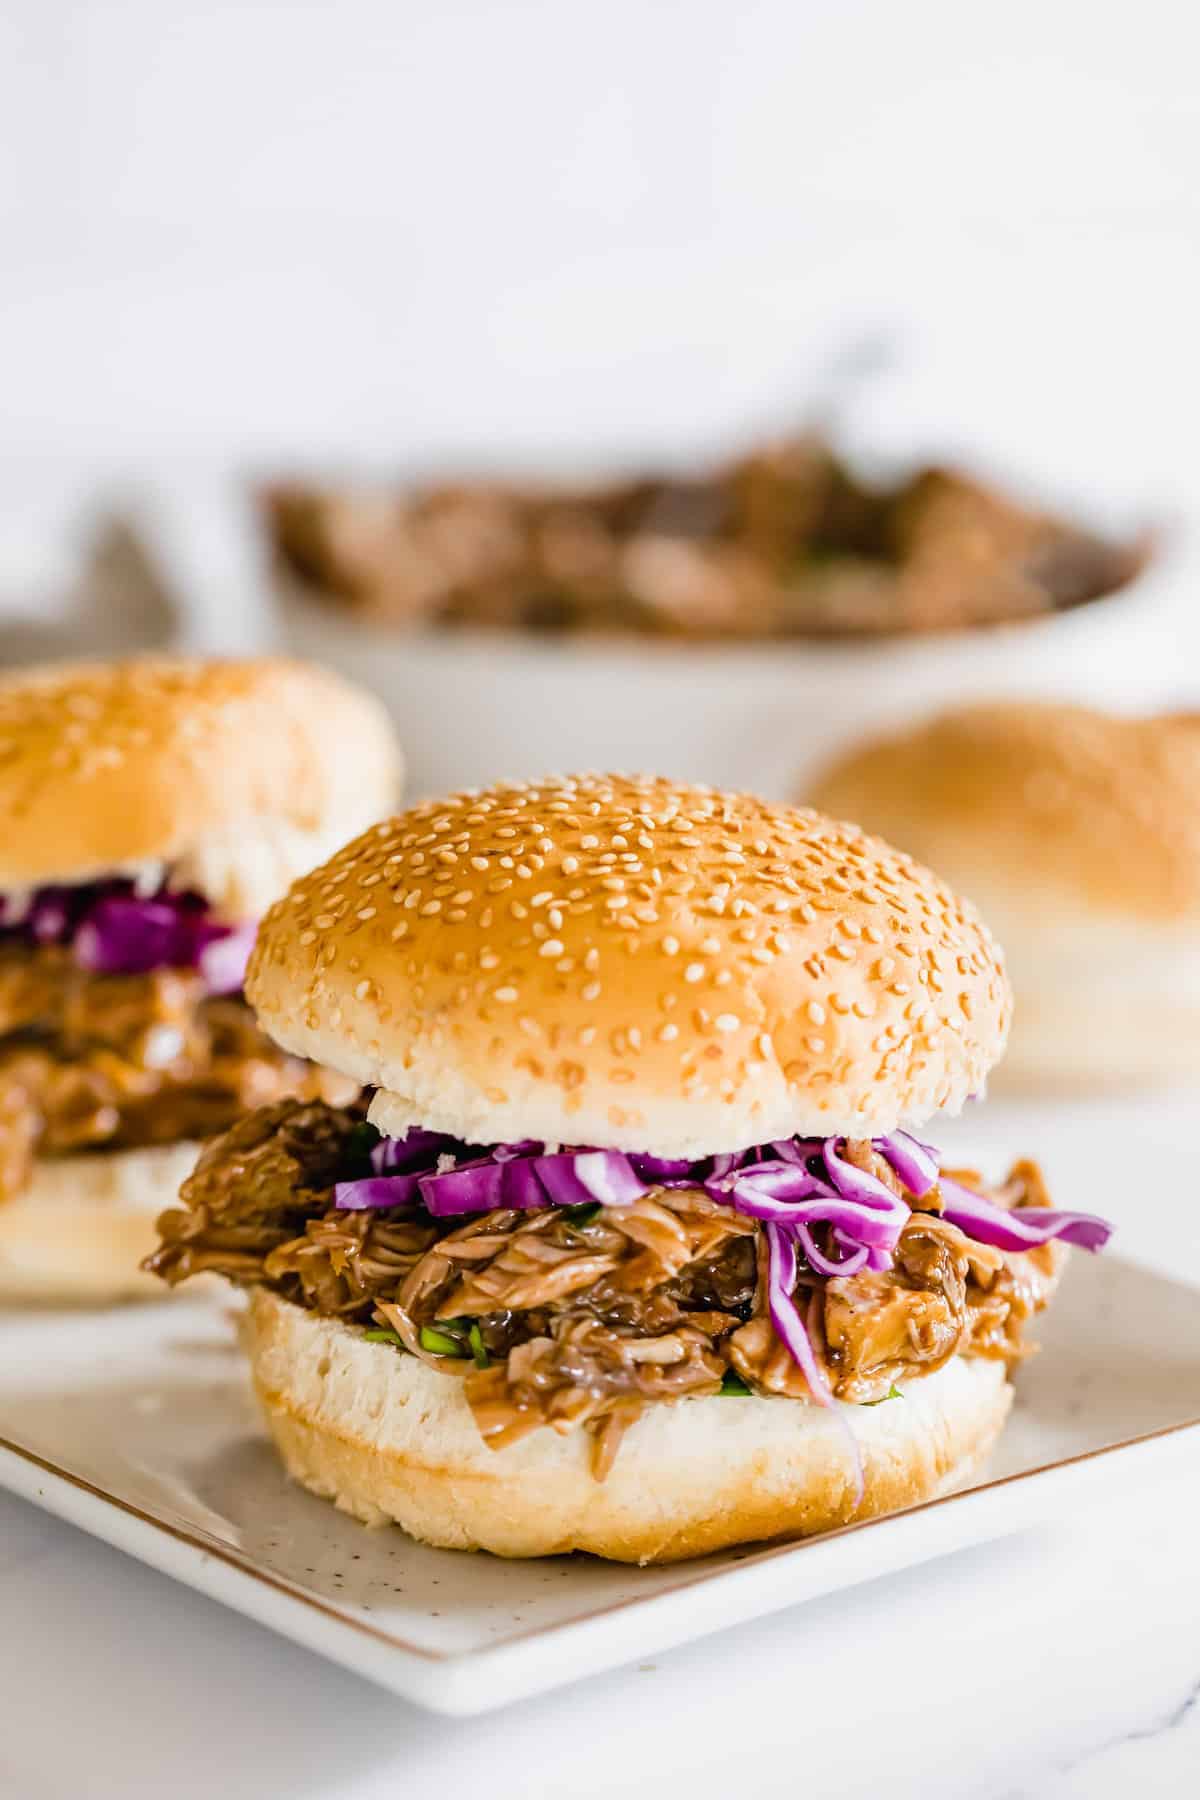 A Pulled Pork Sandwich with Onions on a White Serving Platter